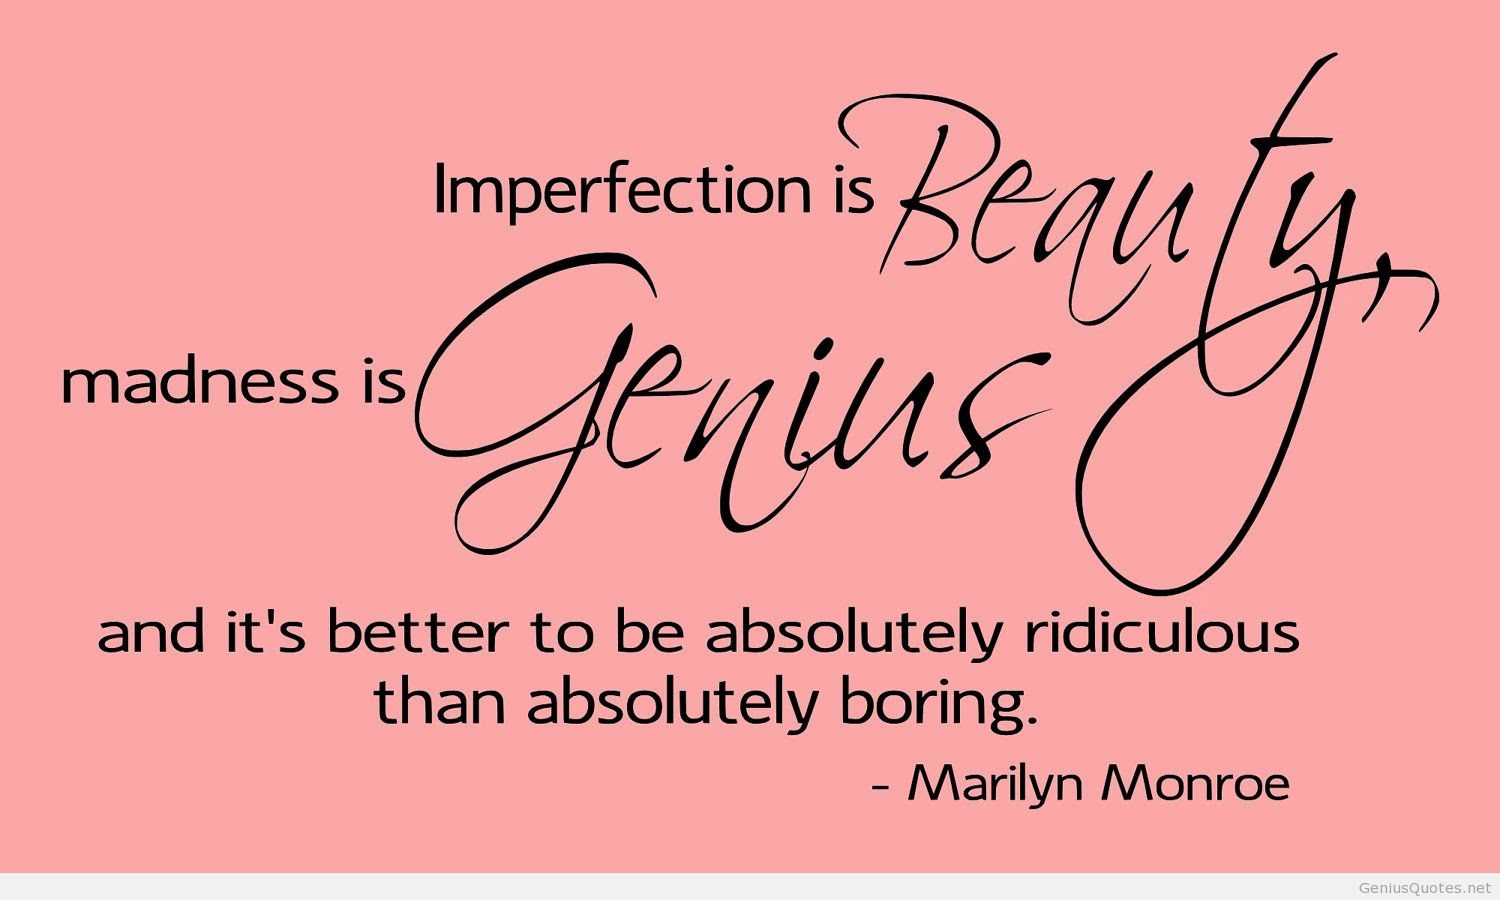 Quotes About Imperfection And Beauty. QuotesGram